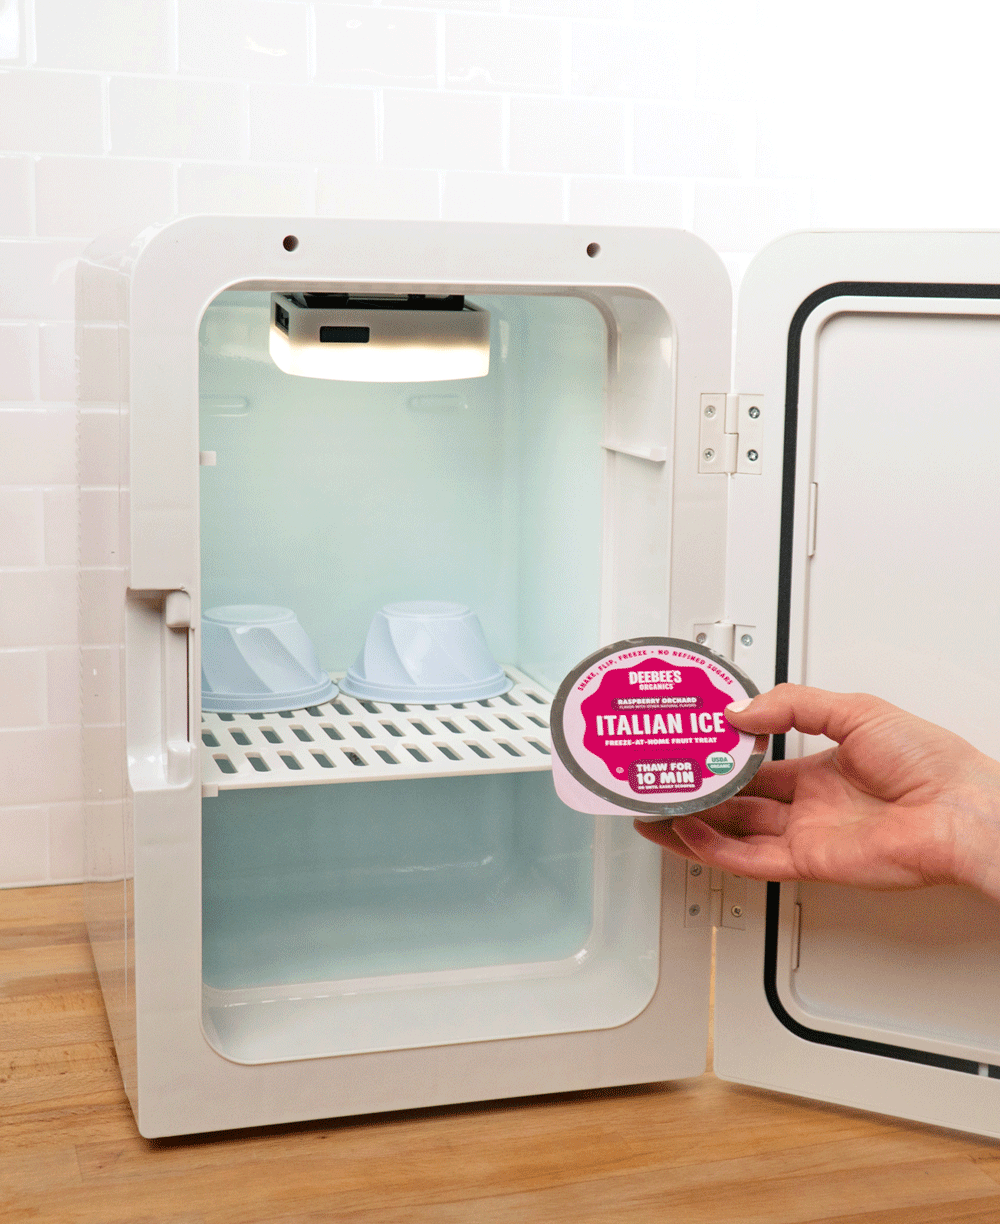 A hand flips a DeeBee's Organics Italian Ice cup upside down while putting it into a small white freezer. 